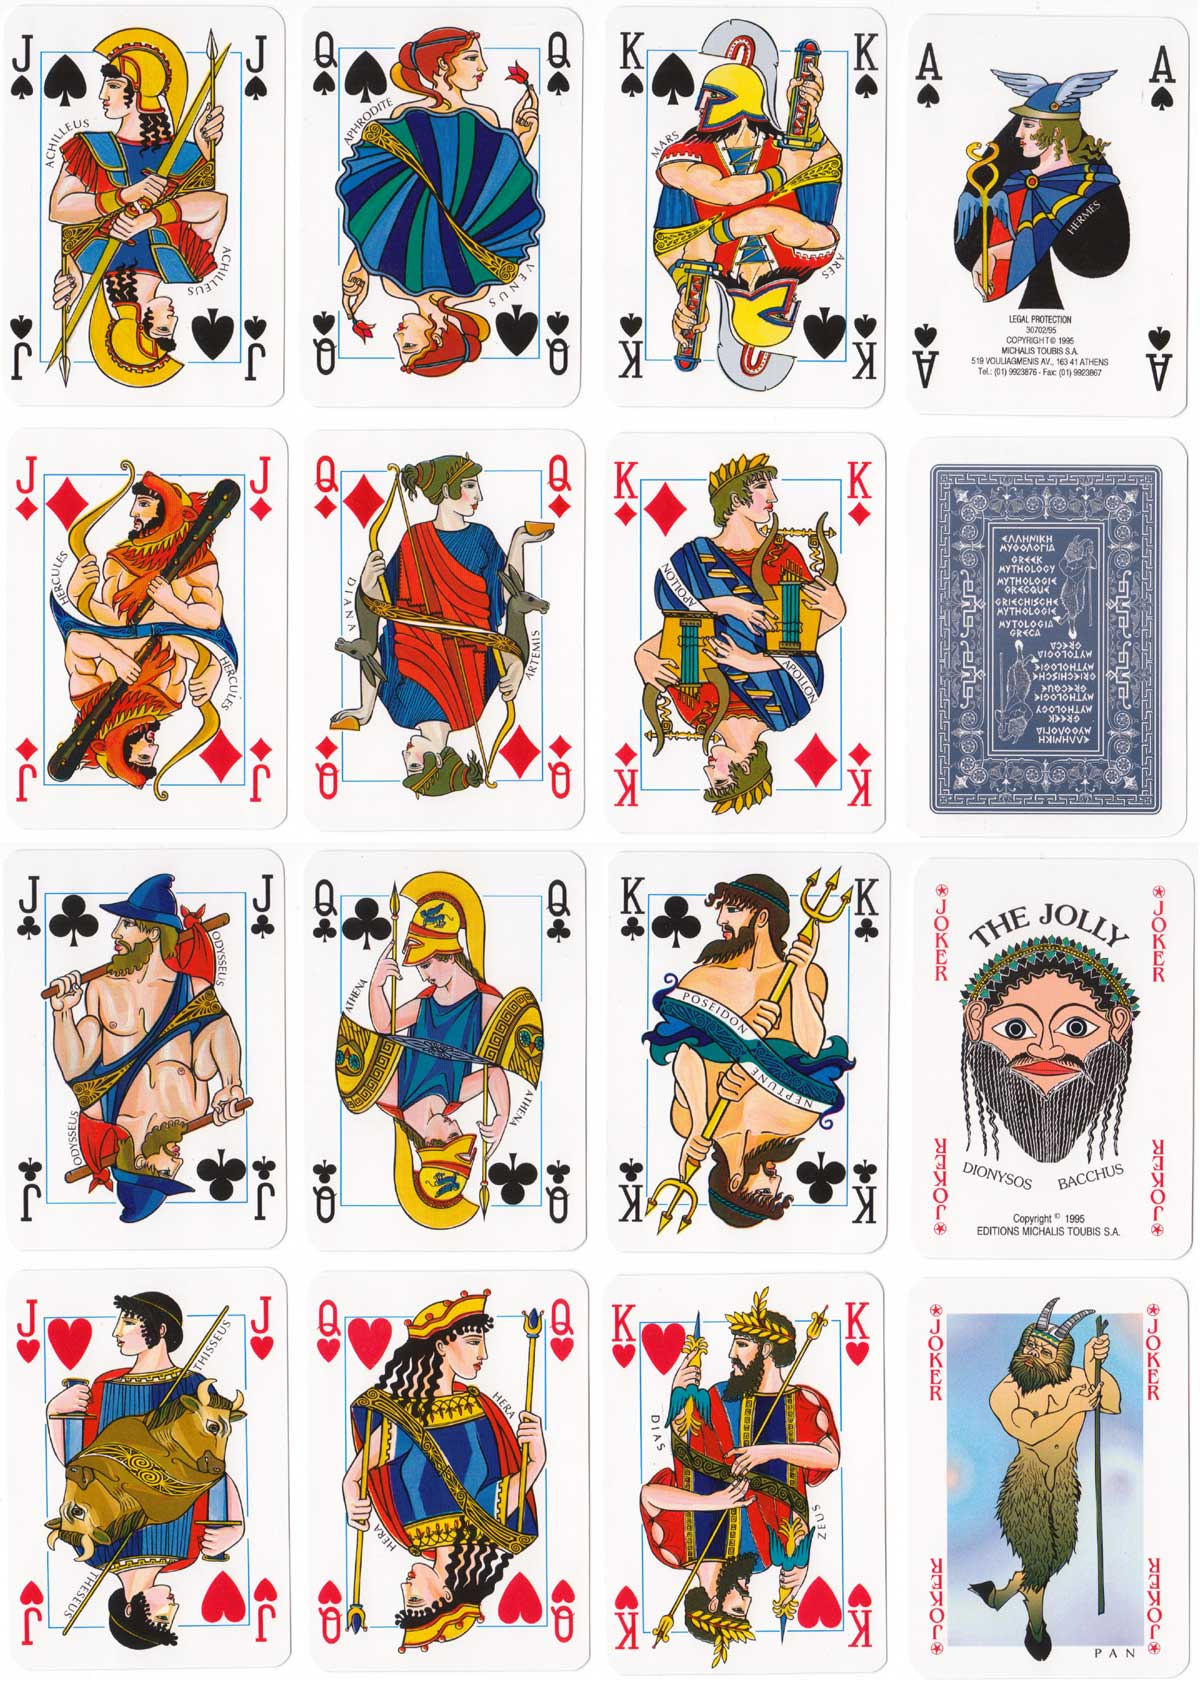 Greek Mythology playing cards published by Michalis Toubis S.A., 1995